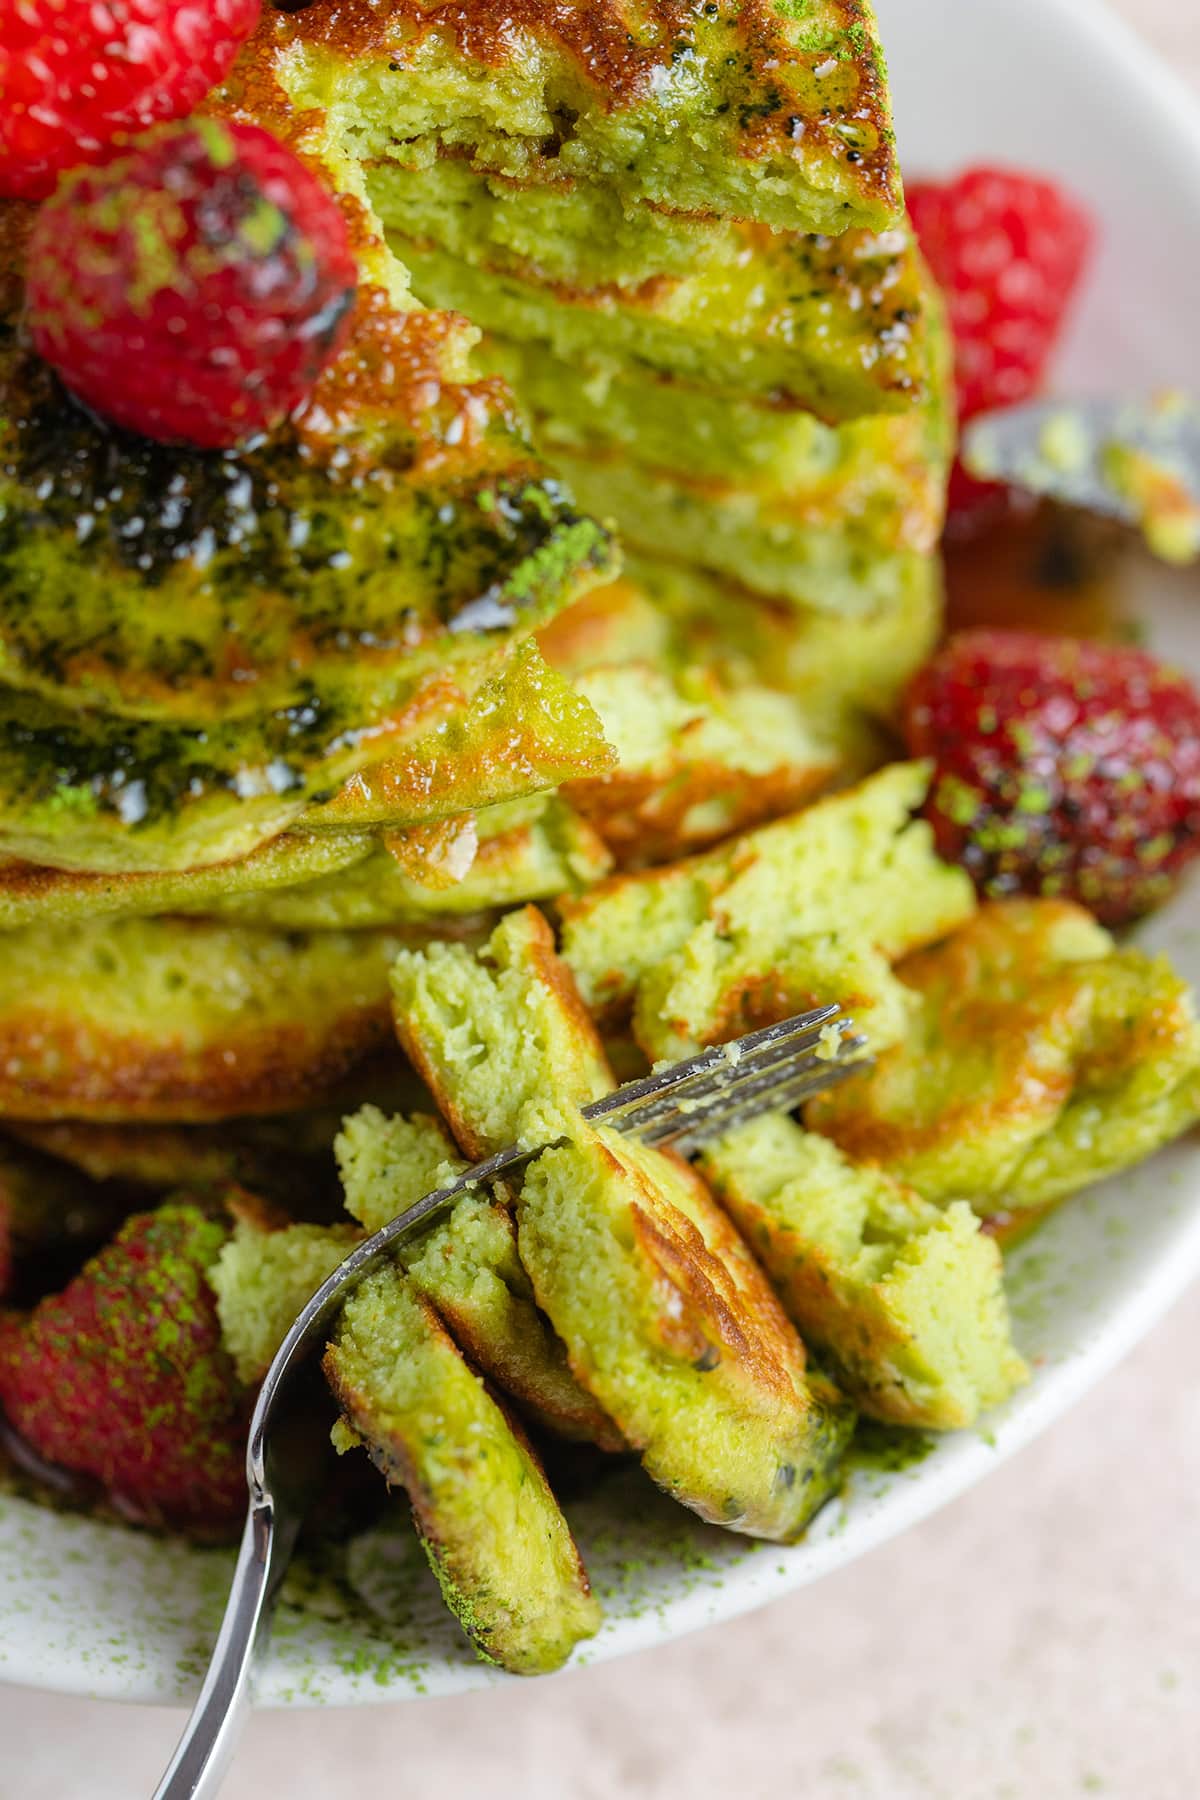 A stack of green matcha pancakes with raspberries drizzled with maple syrup and dusted with matcha powder with a fork taking out a bite.